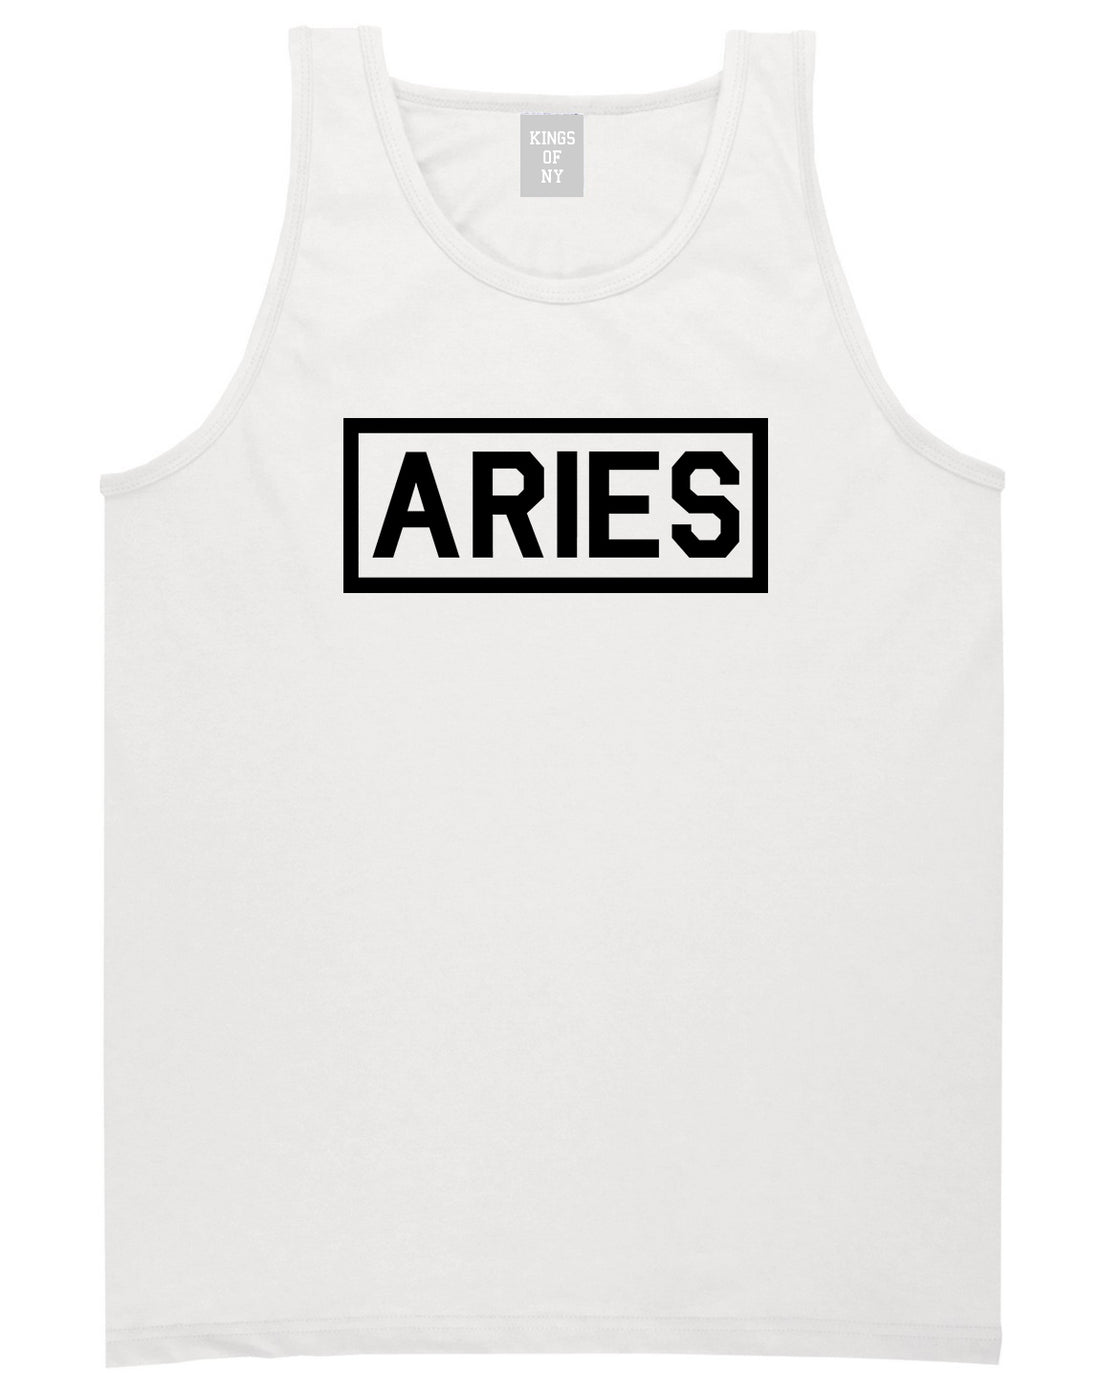 Aries Horoscope Sign Mens White Tank Top Shirt by KINGS OF NY